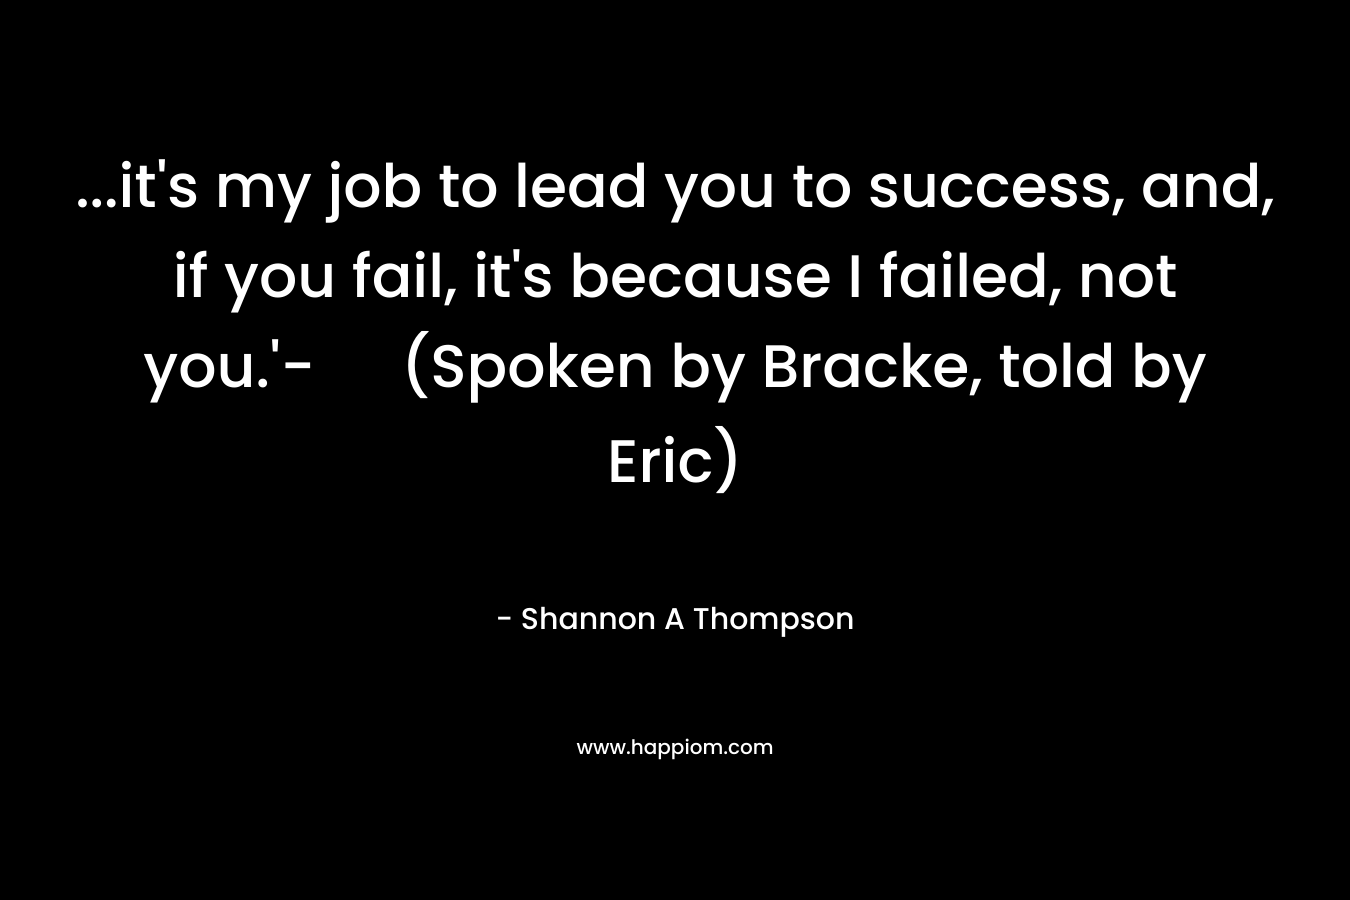 ...it's my job to lead you to success, and, if you fail, it's because I failed, not you.'- (Spoken by Bracke, told by Eric)